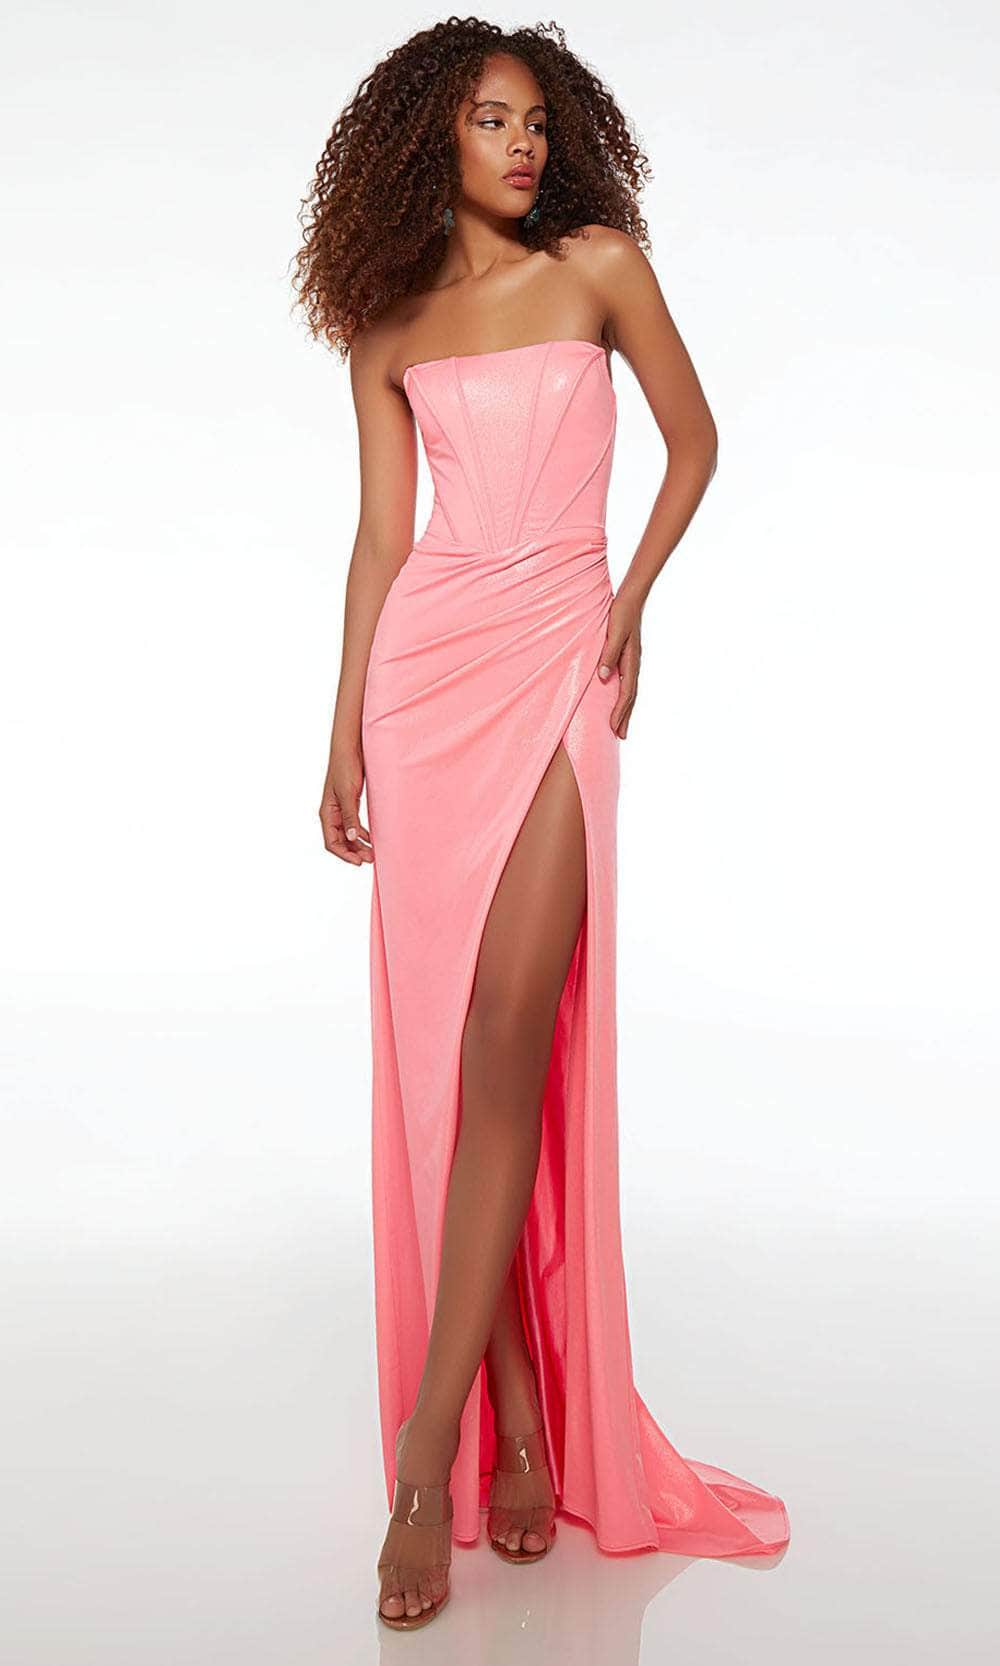 Alyce Paris 61512 - Metallic Prom Dress with Slit Special Occasion Dresses